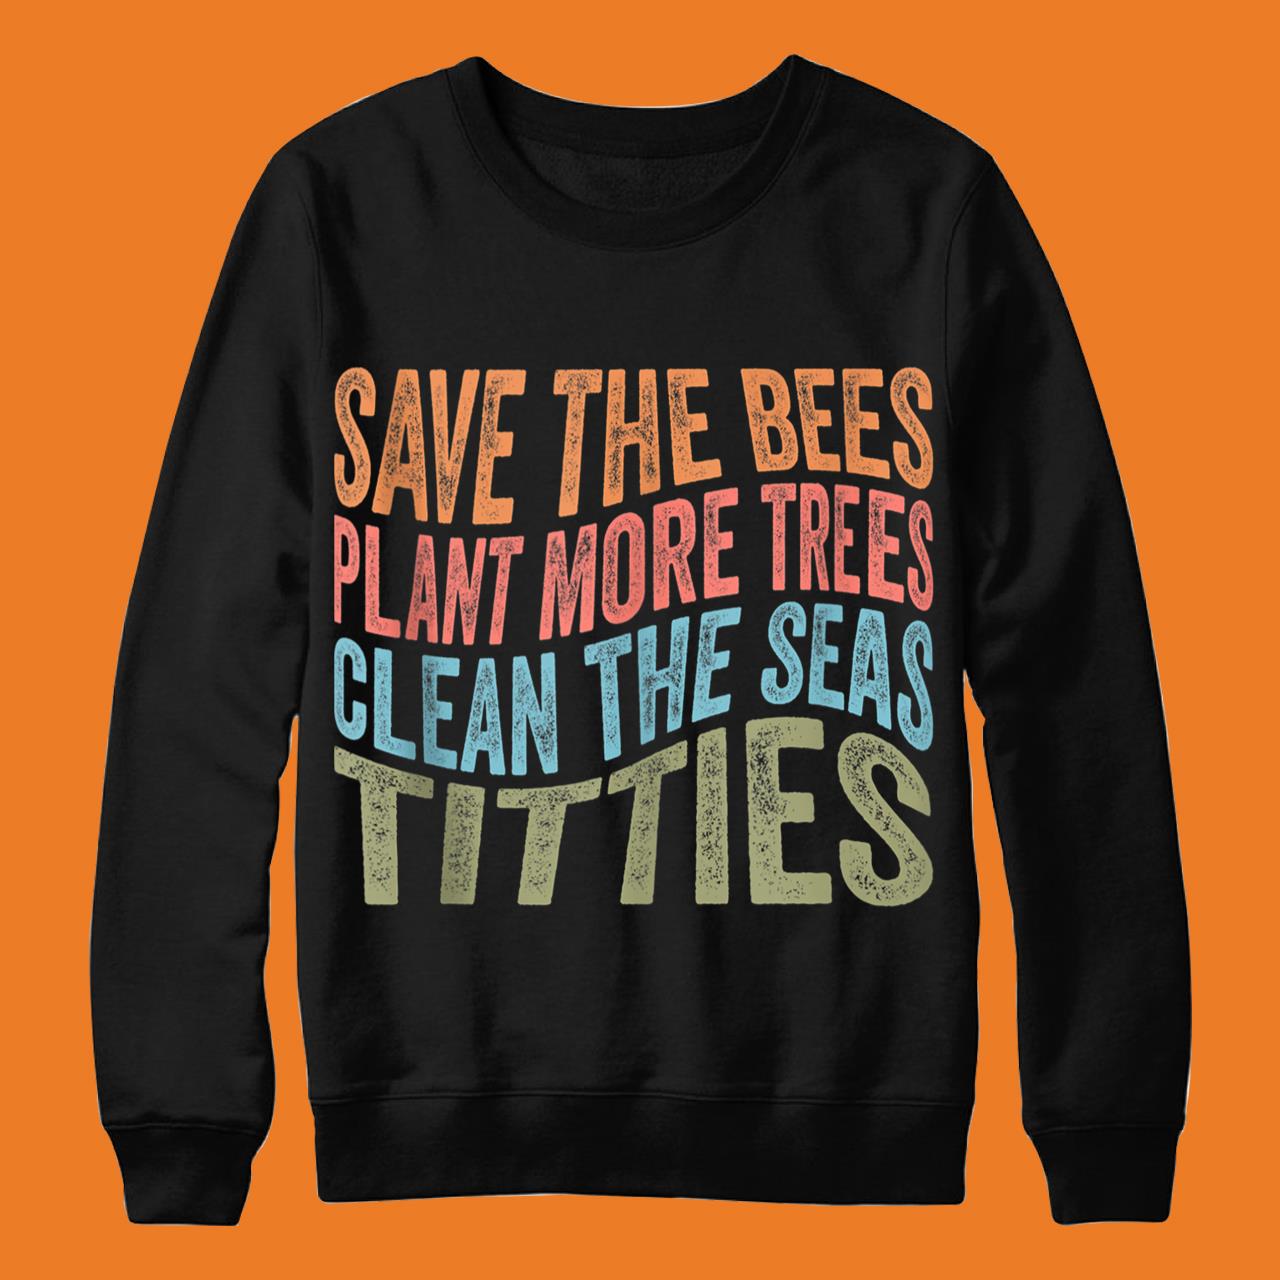 Save The Bees Plant More Trees Clean The Seas Titties Vintage Funny Shirt